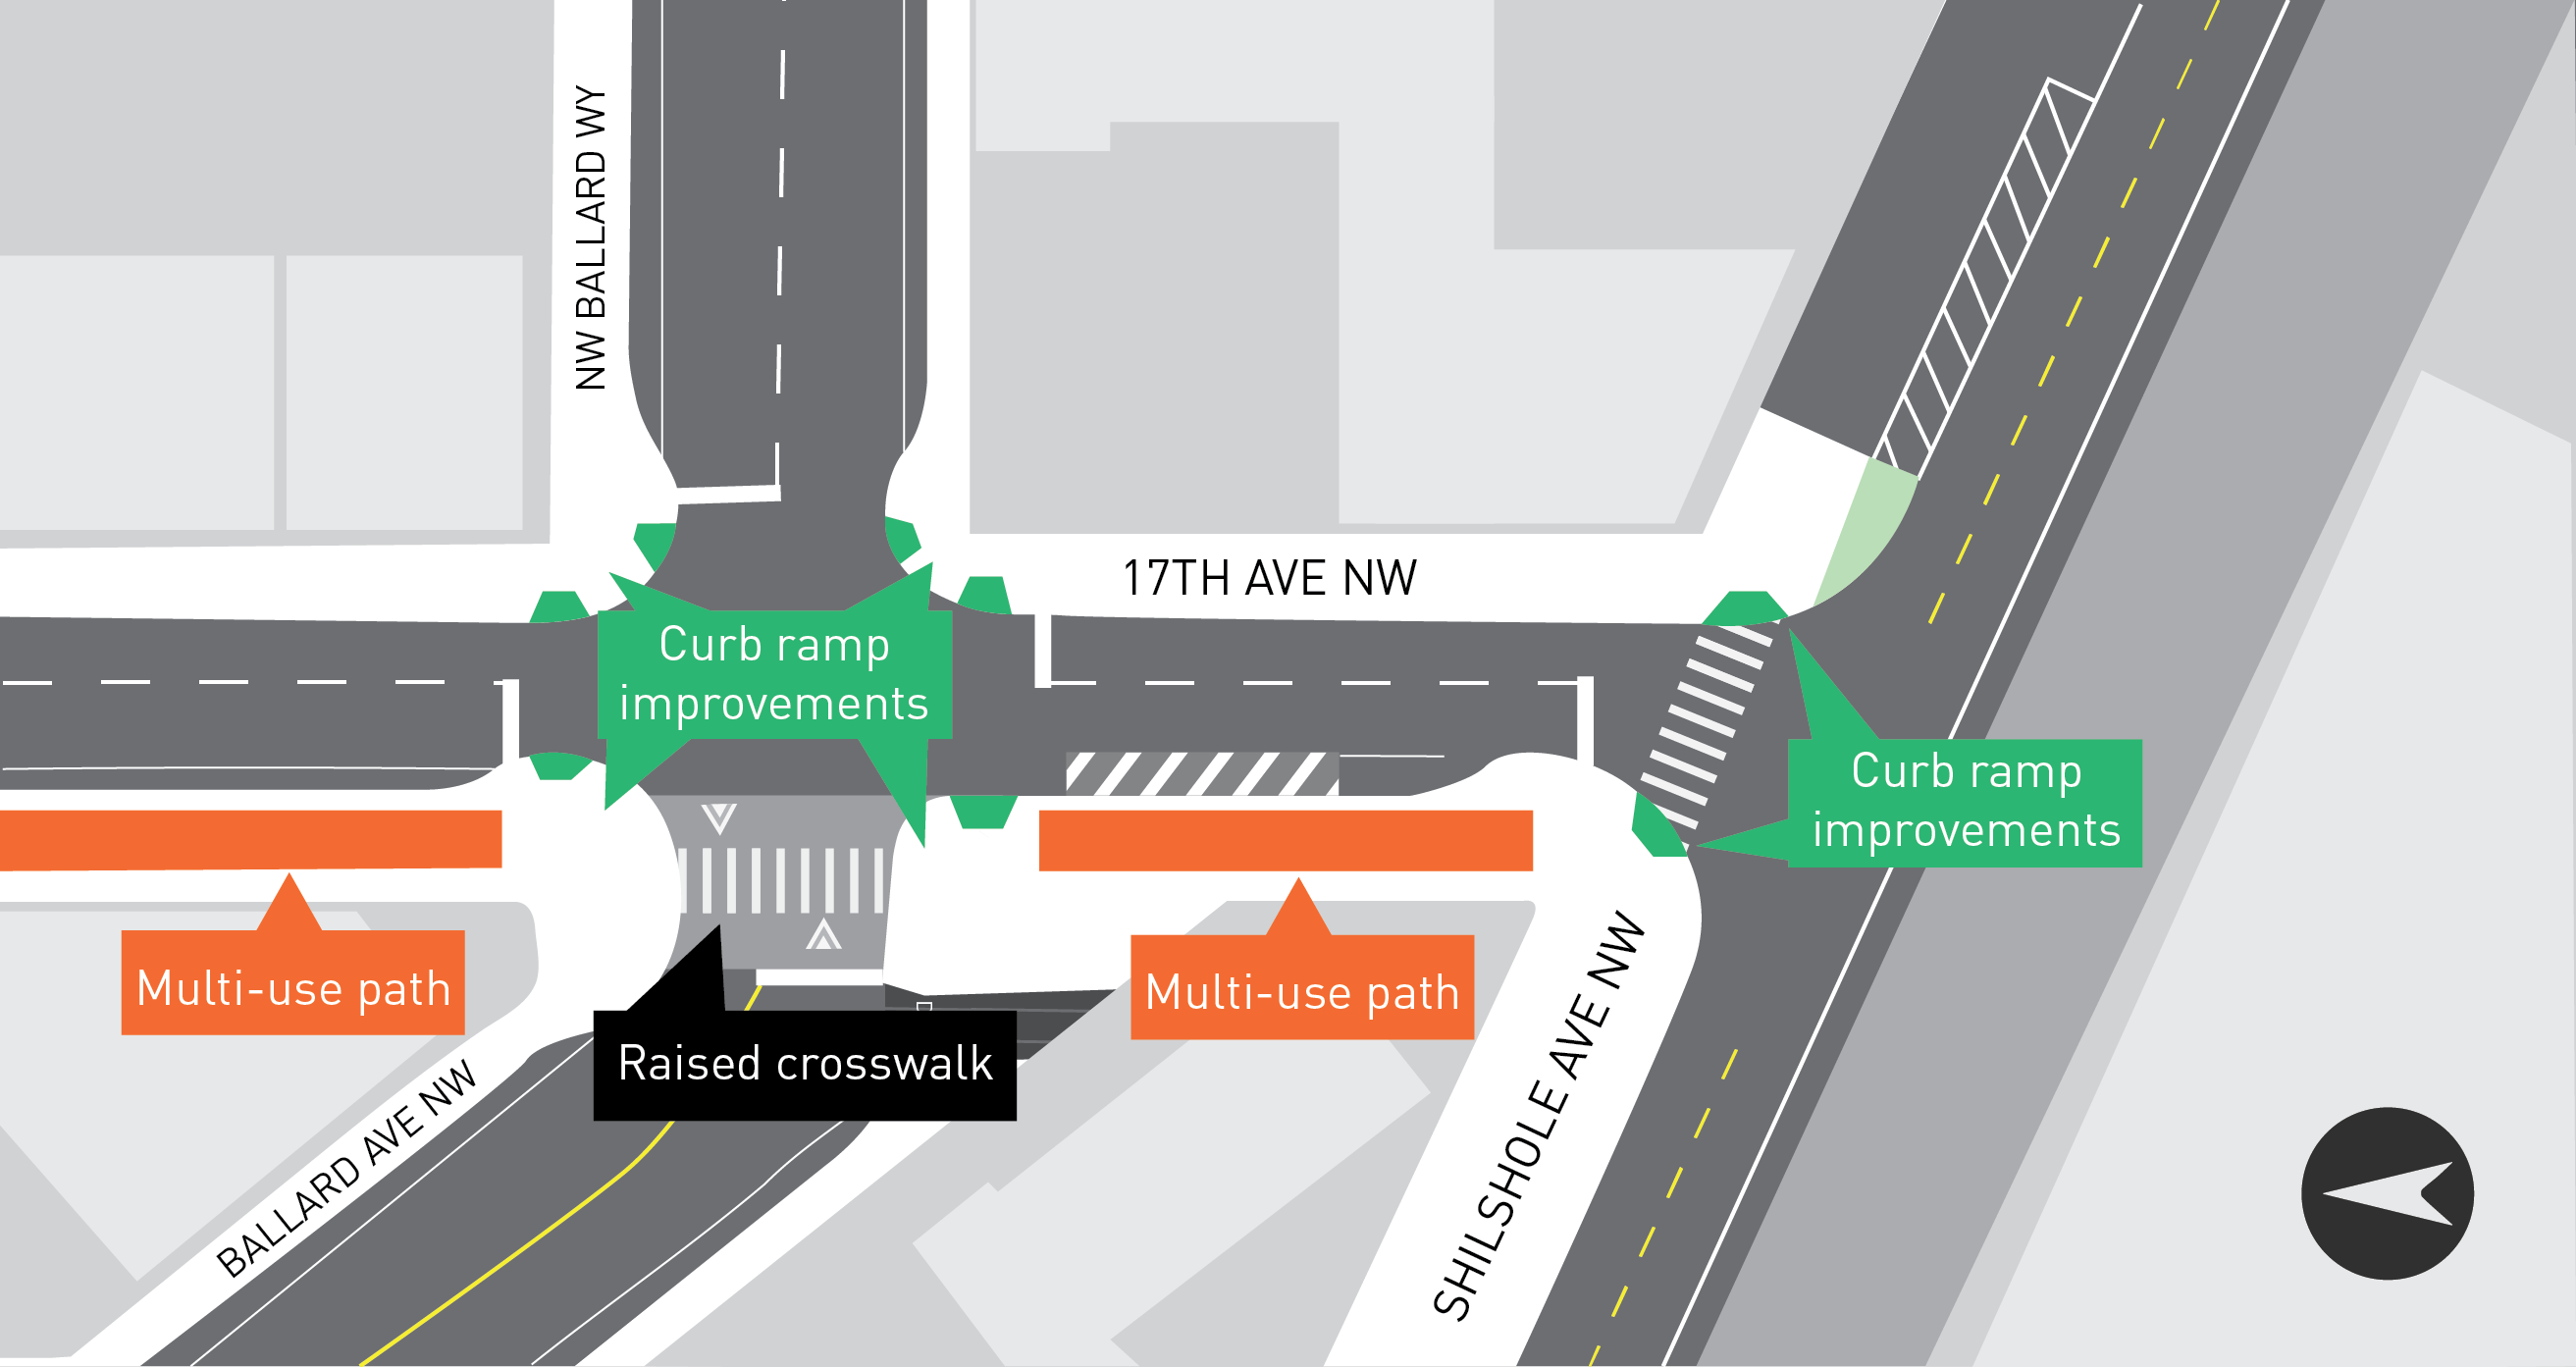 17th Ave NW & NW Ballard Way & Shilshole Ave NW showing curb ramp improvements, a multi-use path, and raised crosswalks